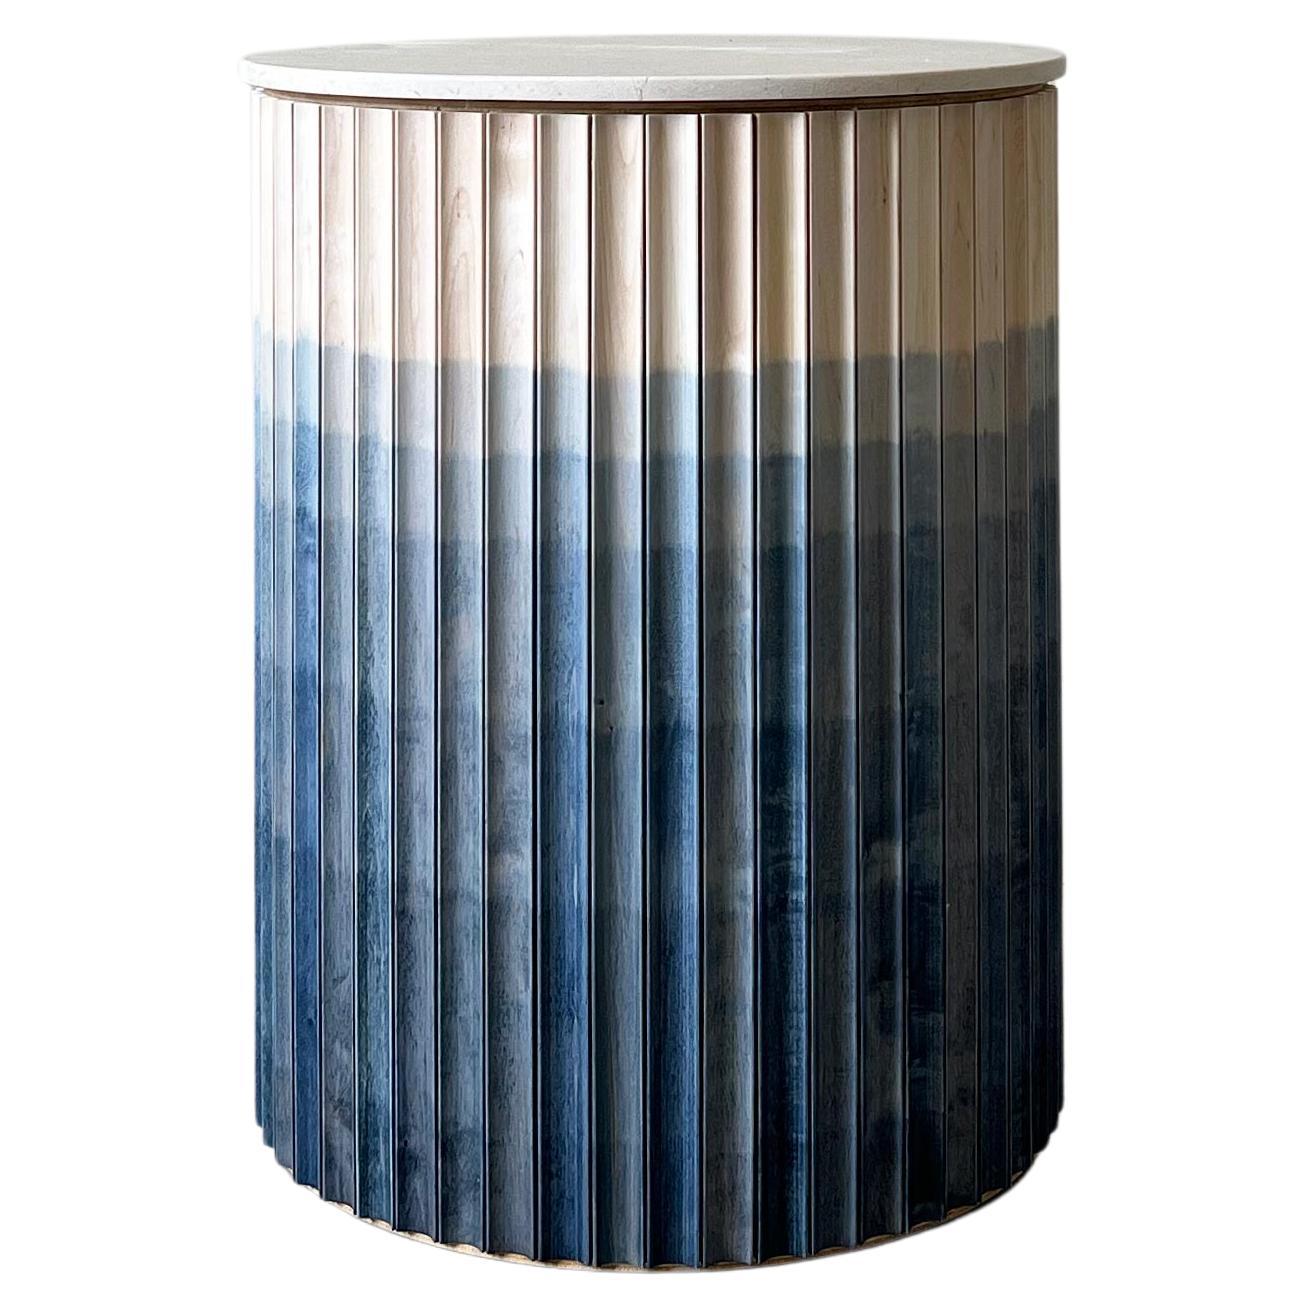 Pilar Round End Table / Cobalt Blue Ombré Maple Wood / Crema Marble Top by INDO-